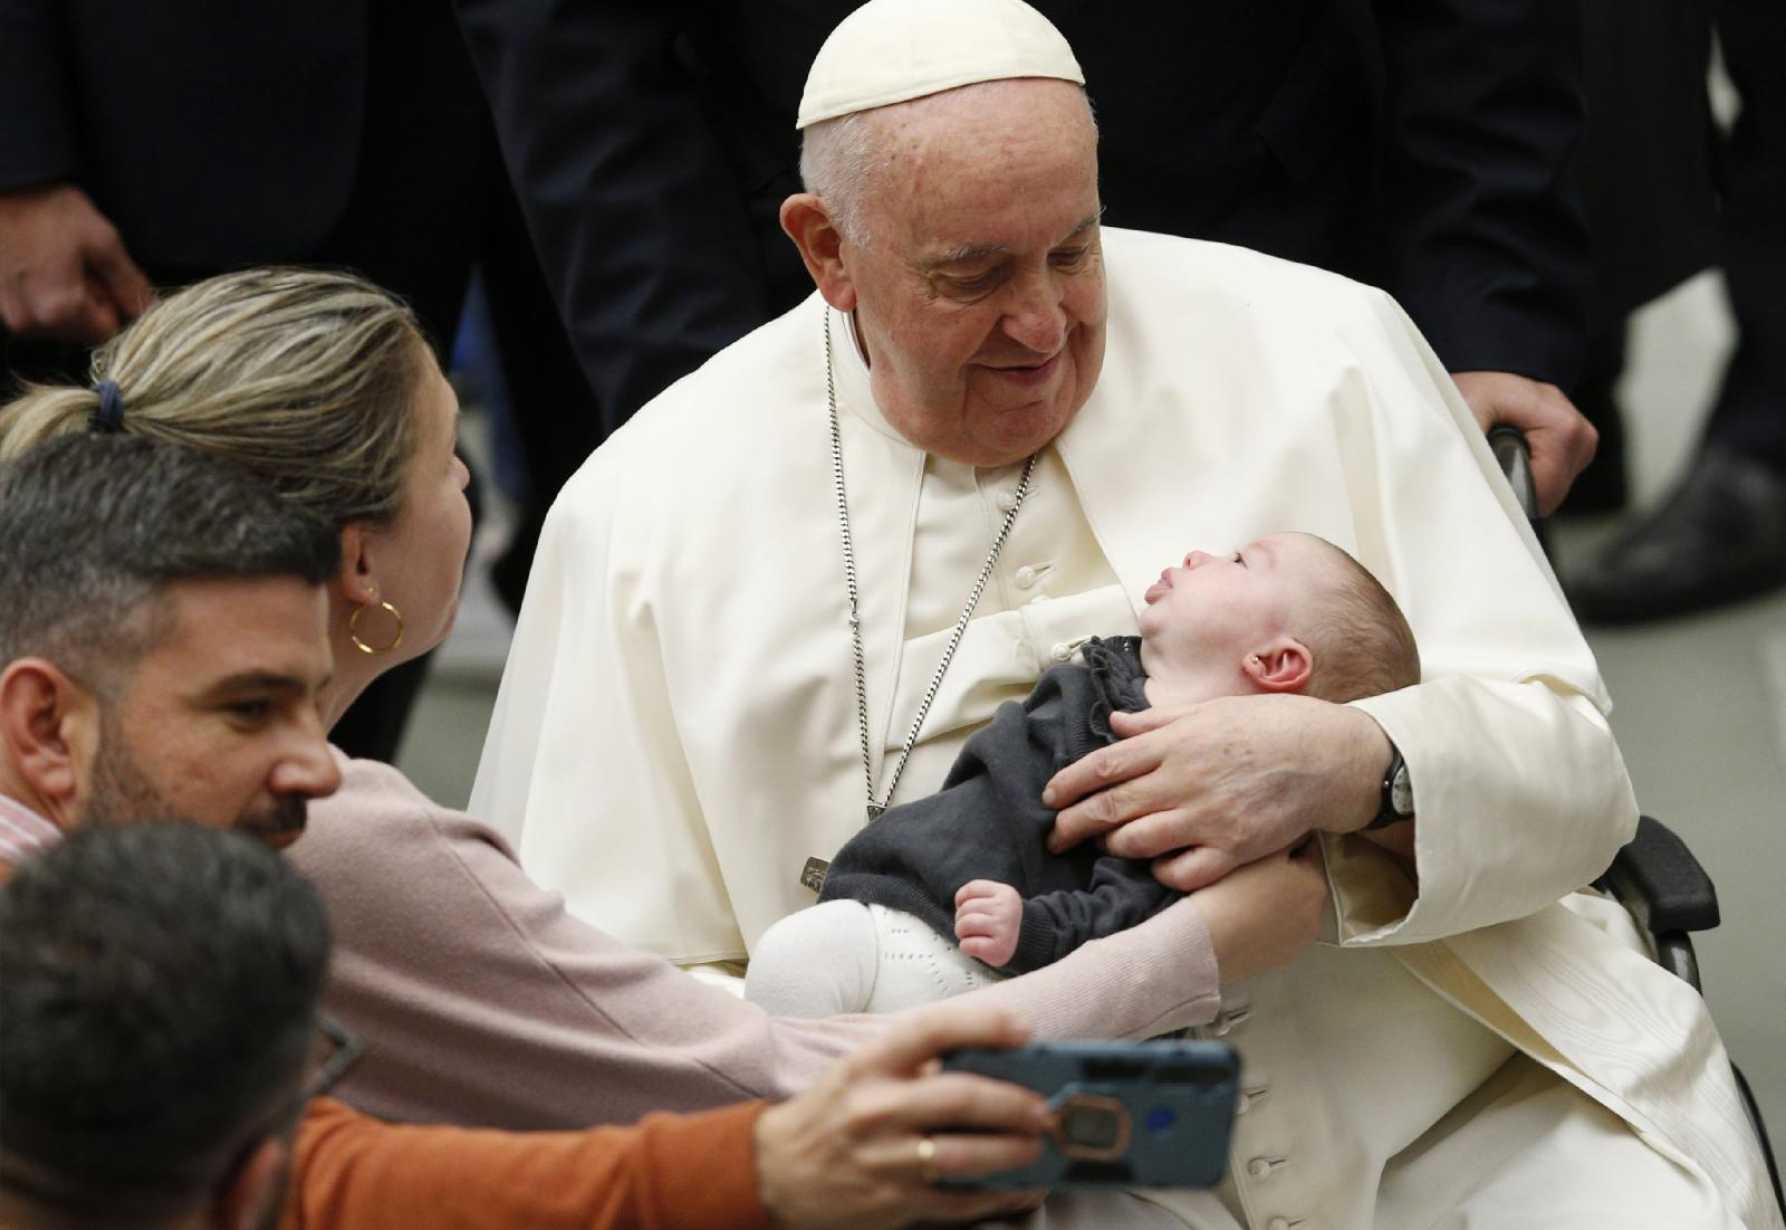 Pope prays God will strengthen commitment to defending all human life